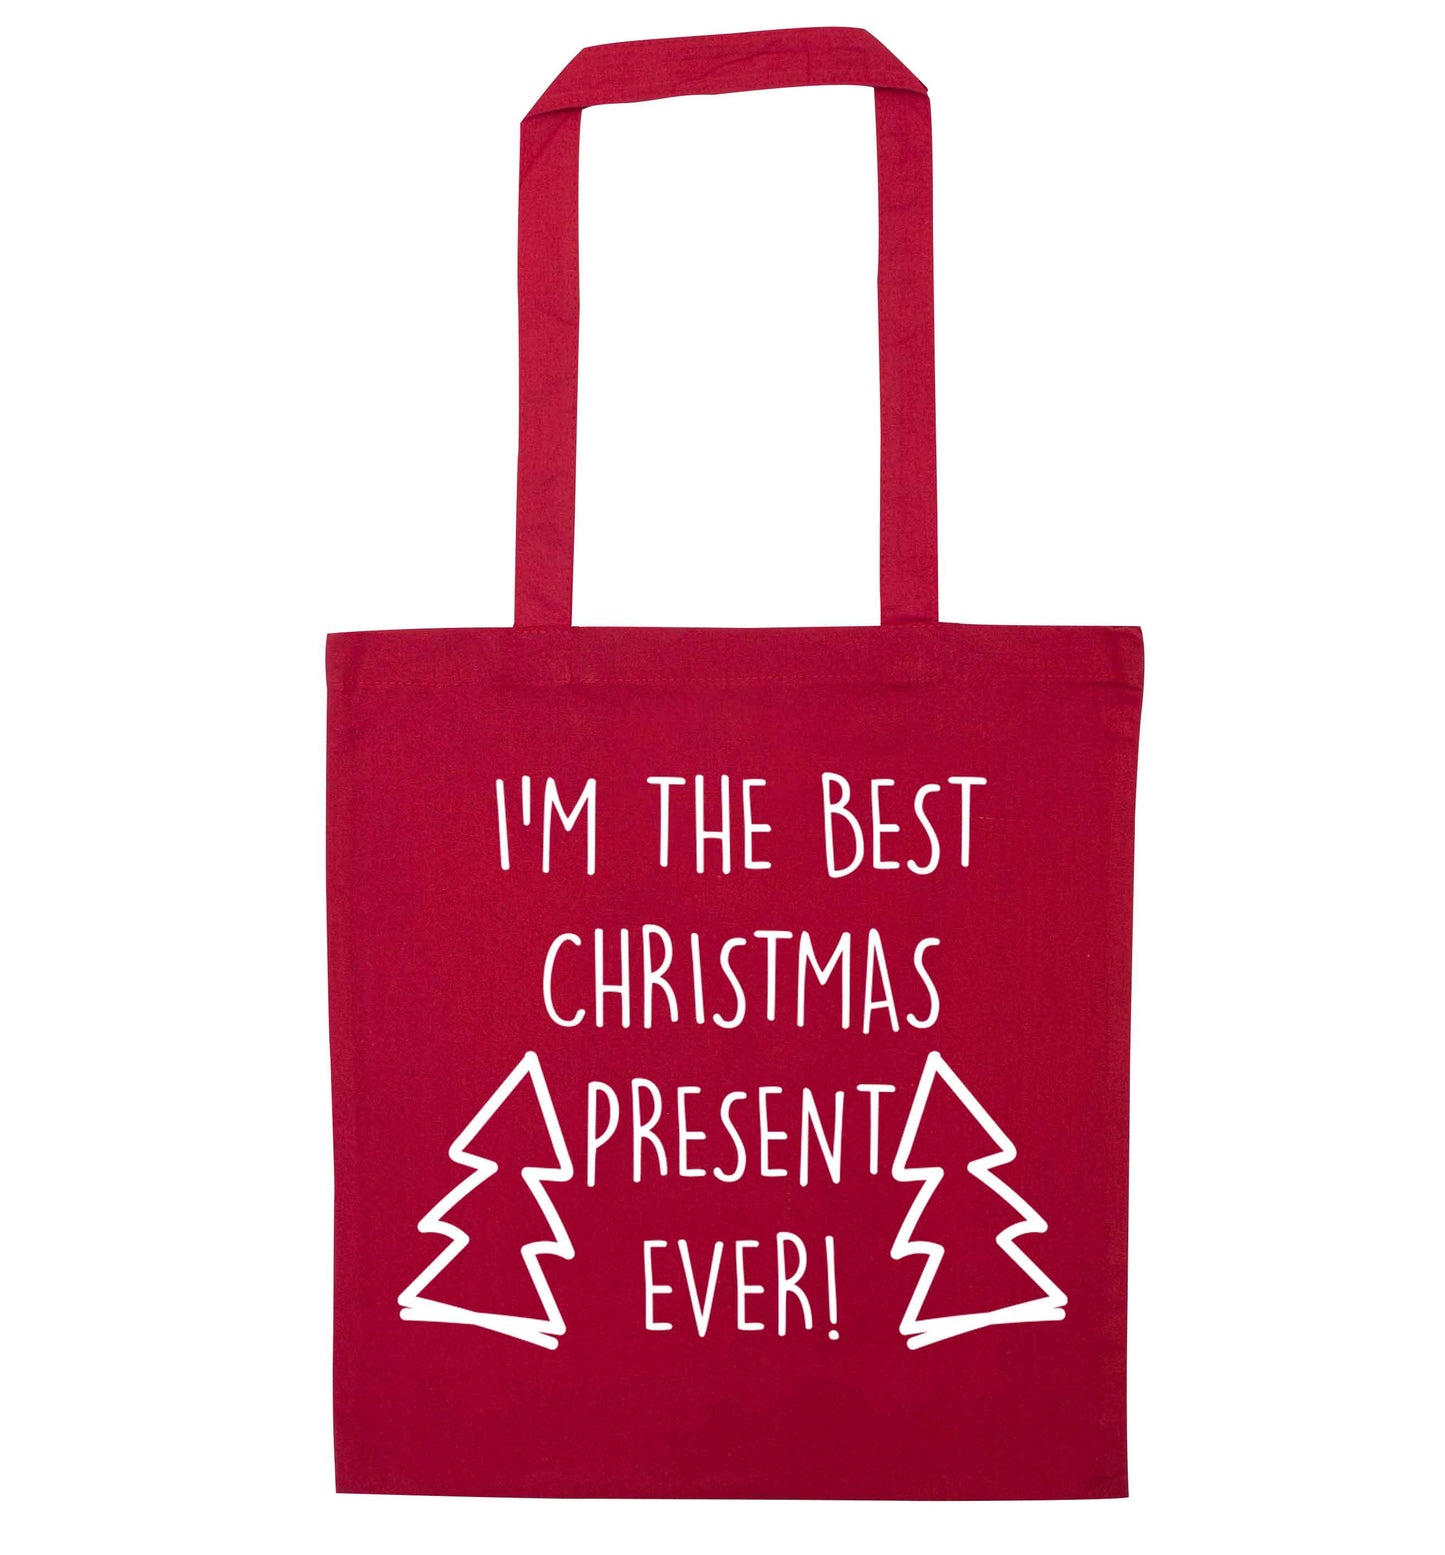 I'm the best Christmas present ever red tote bag